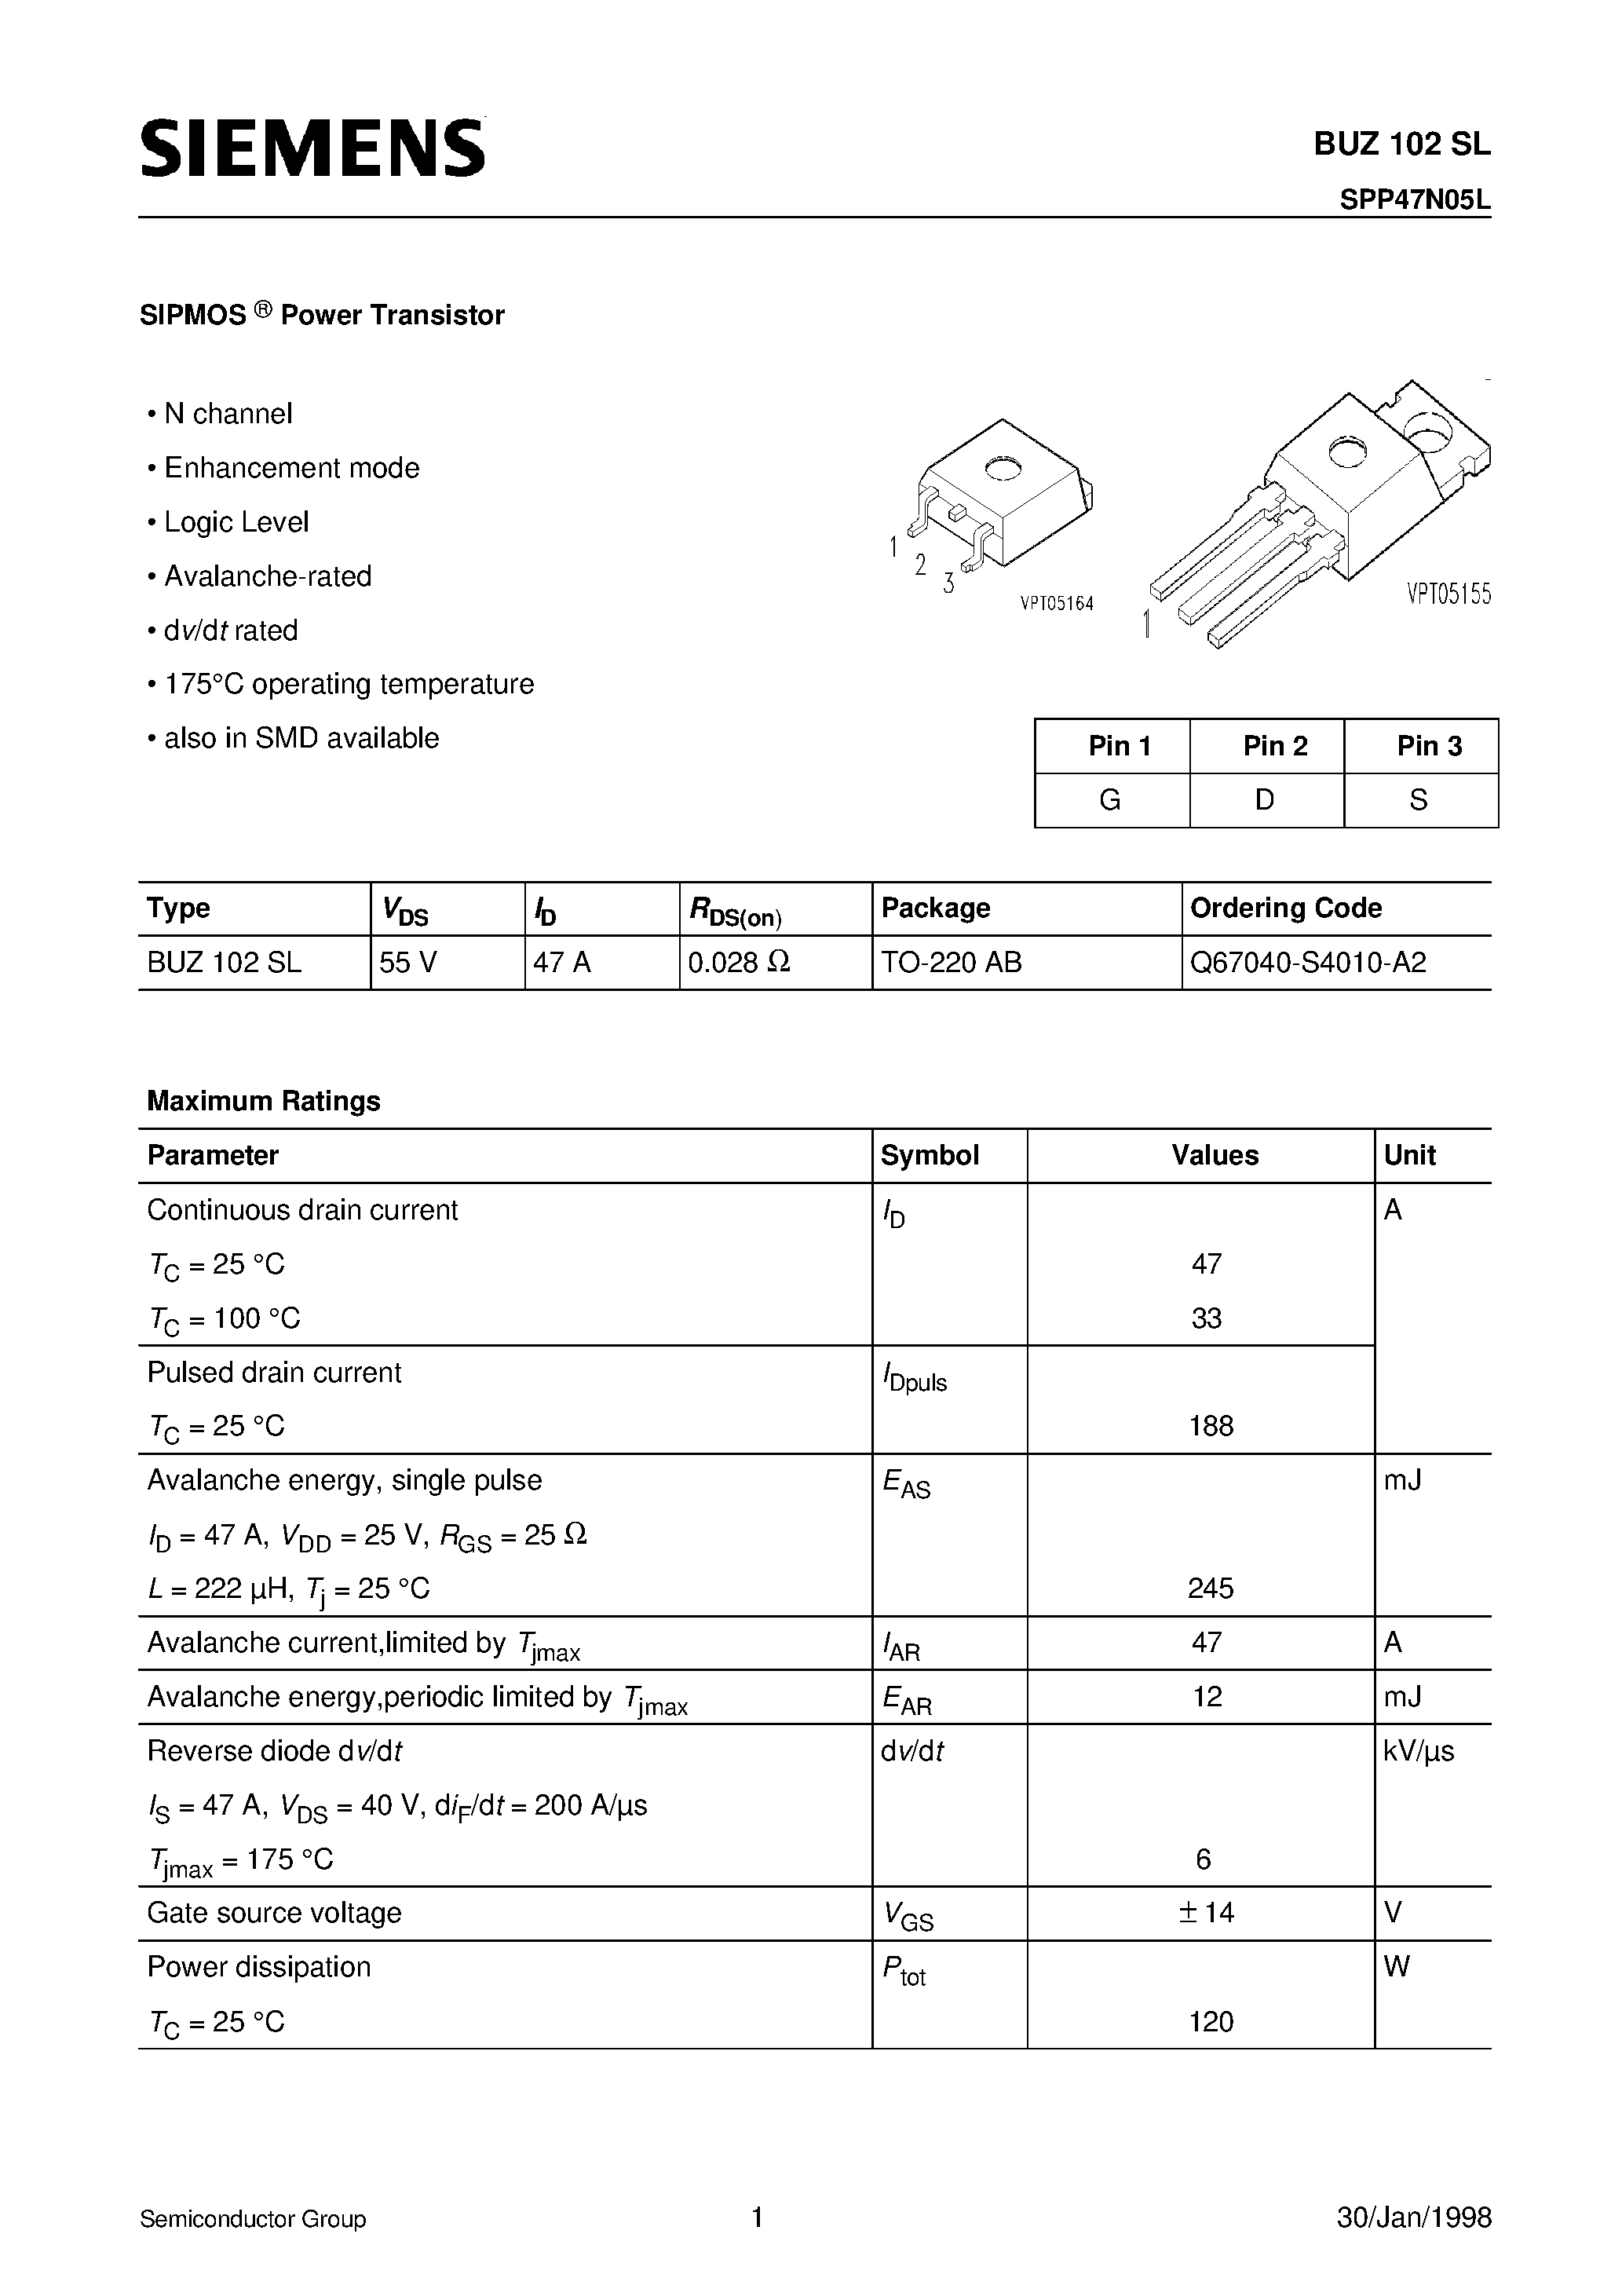 Datasheet BUZ102SL - SIPMOS Power Transistor (N channel Enhancement mode Logic Level Avalanche-rated dv/dt rated) page 1